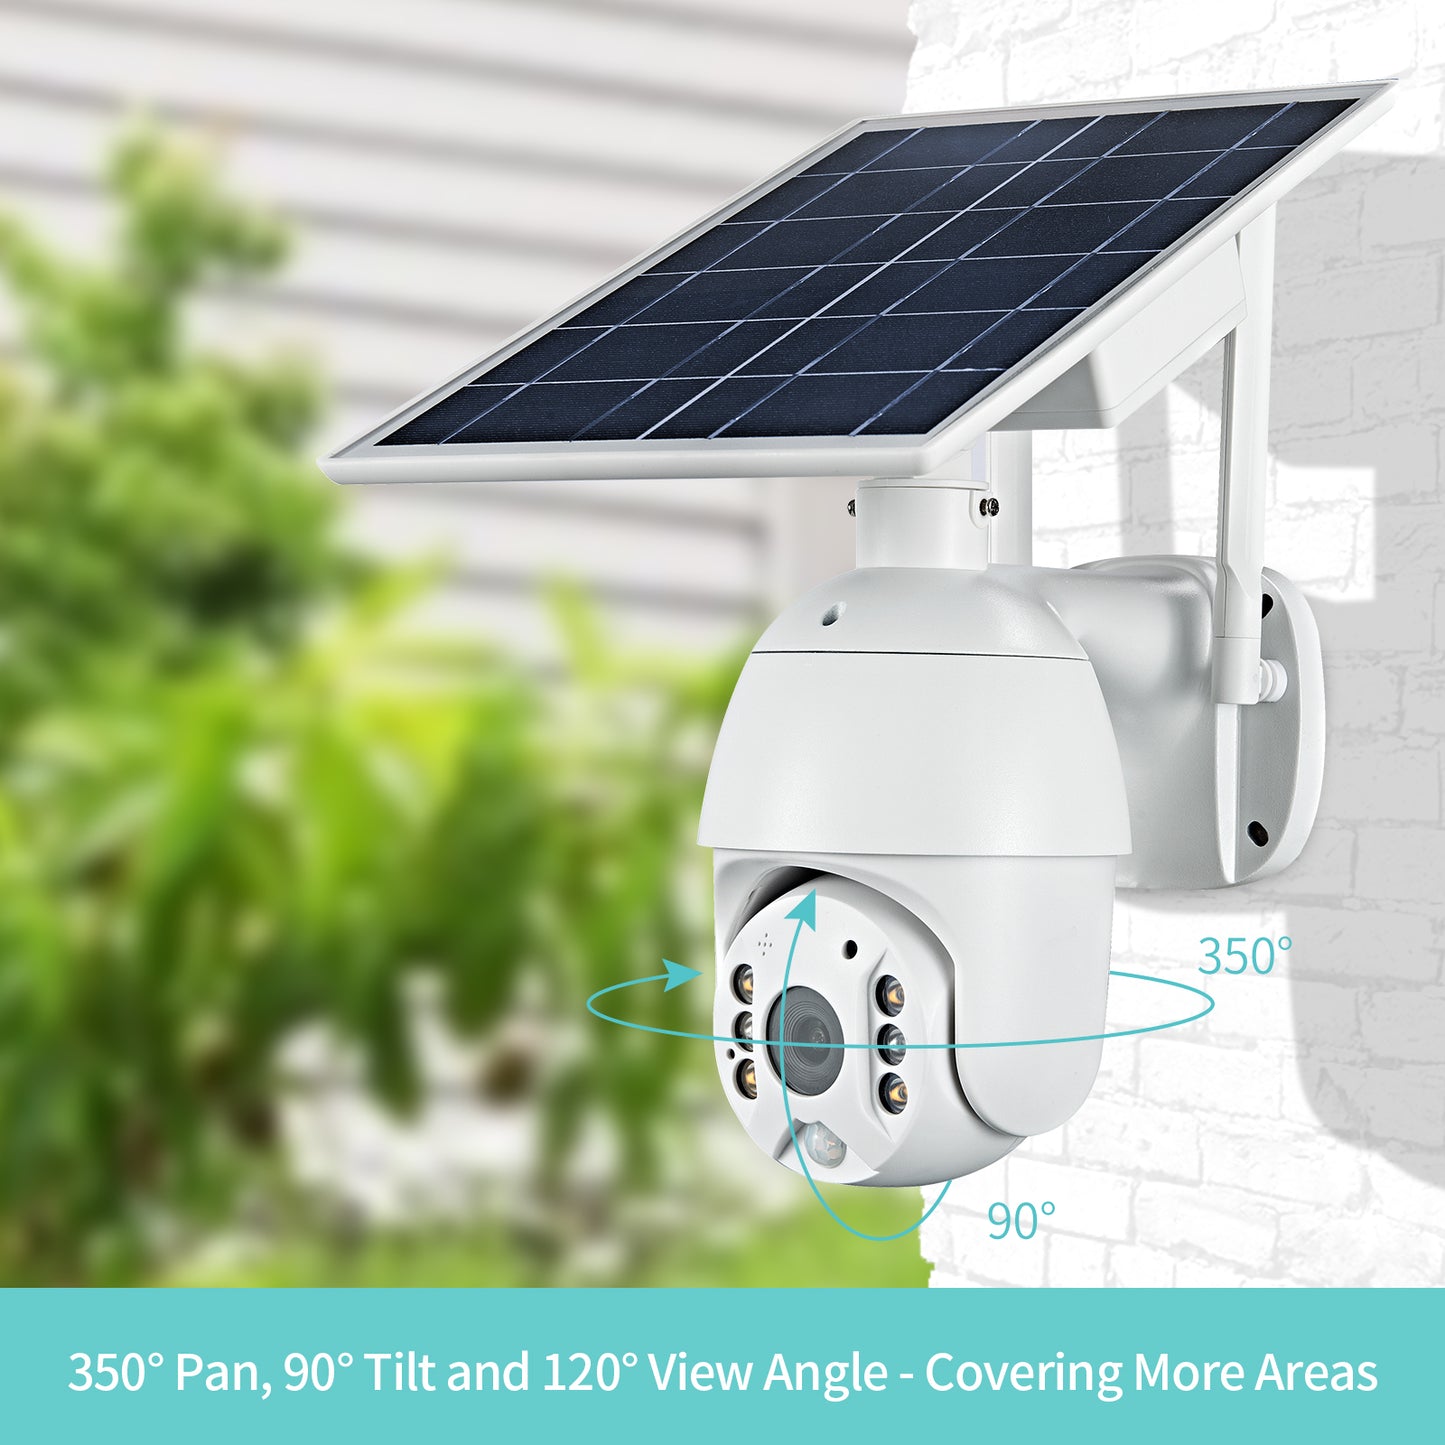 LOOSAFE S10 4G LTE Cellular Security Camera Outdoor